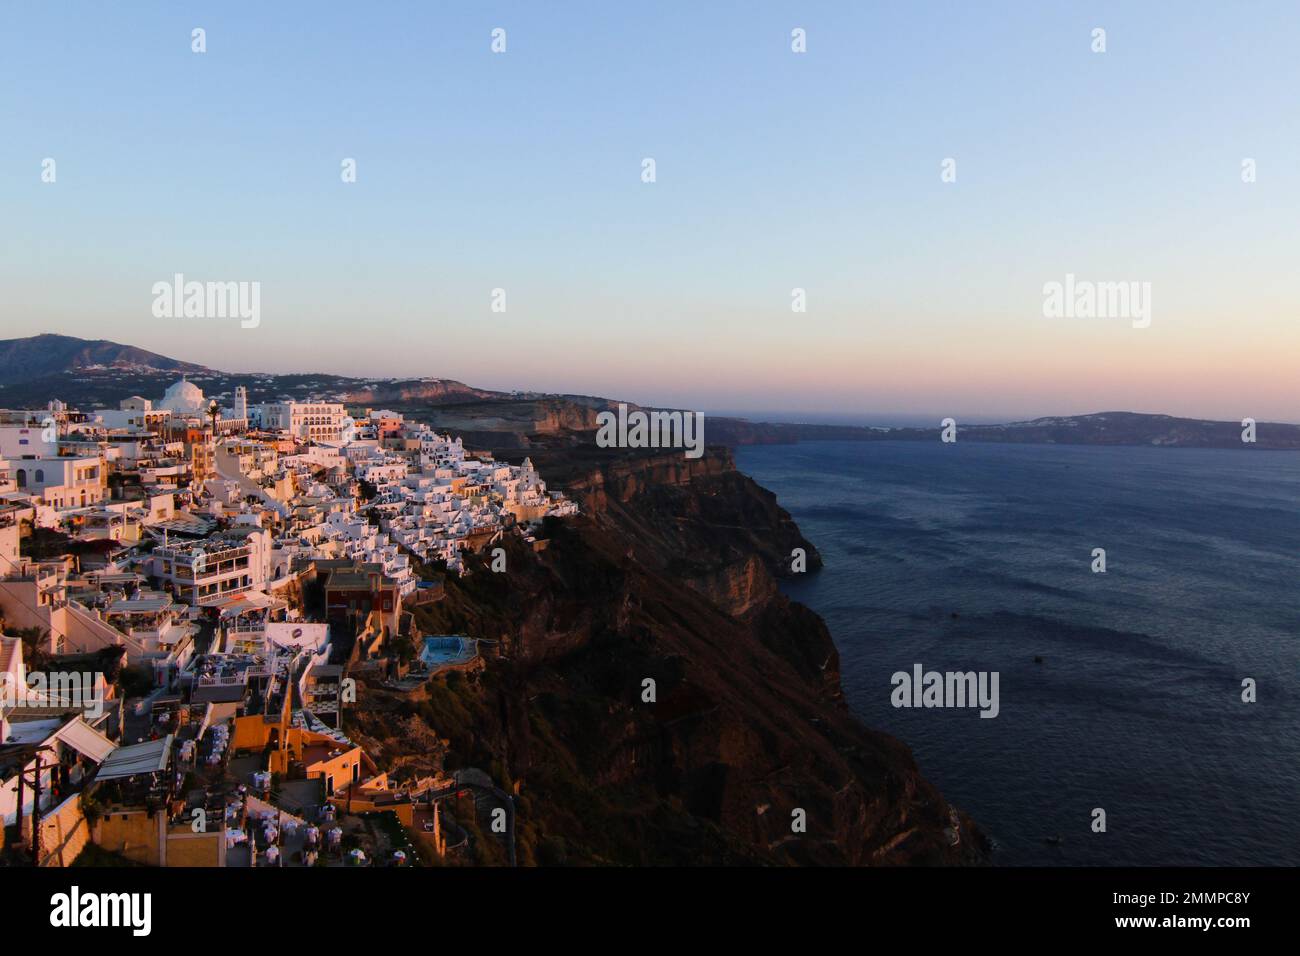 Sunset over looking the caldera and picturesque villages clinging to the hill side. Santorini, Greece Stock Photo